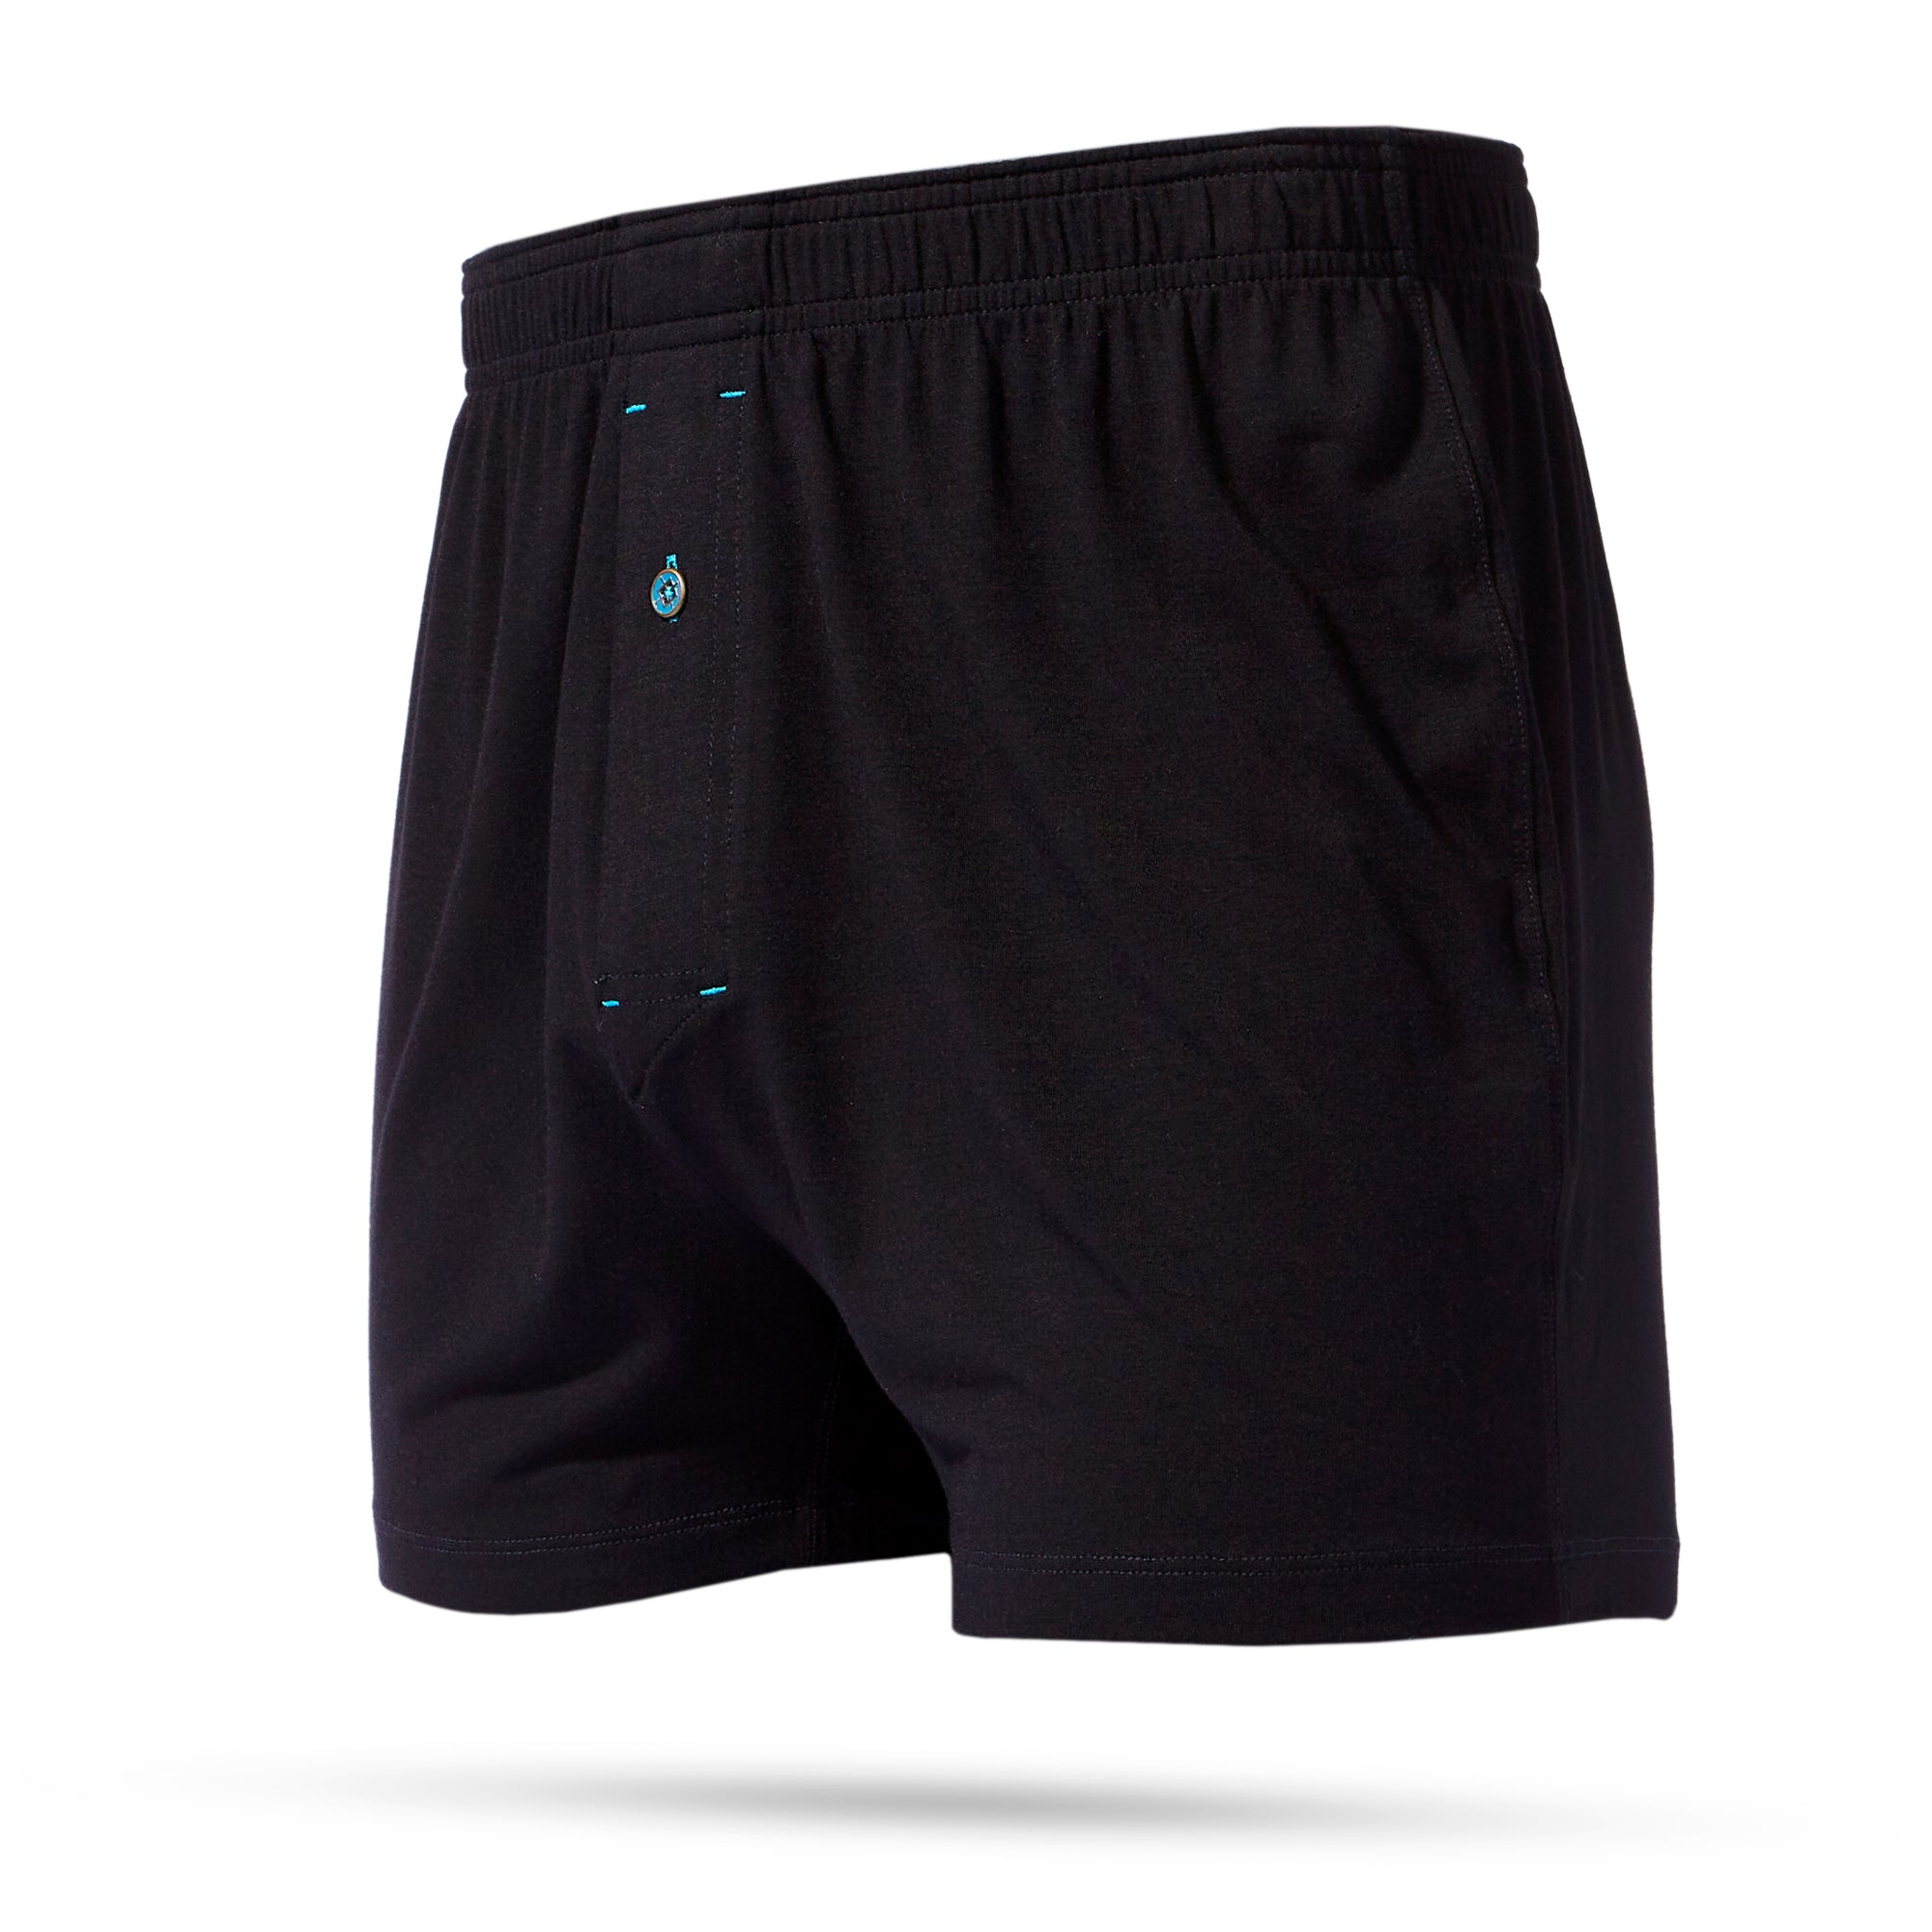 Stance Reels Butter Blend Boxer Brief With Wholester™ - Khaki - MODA3